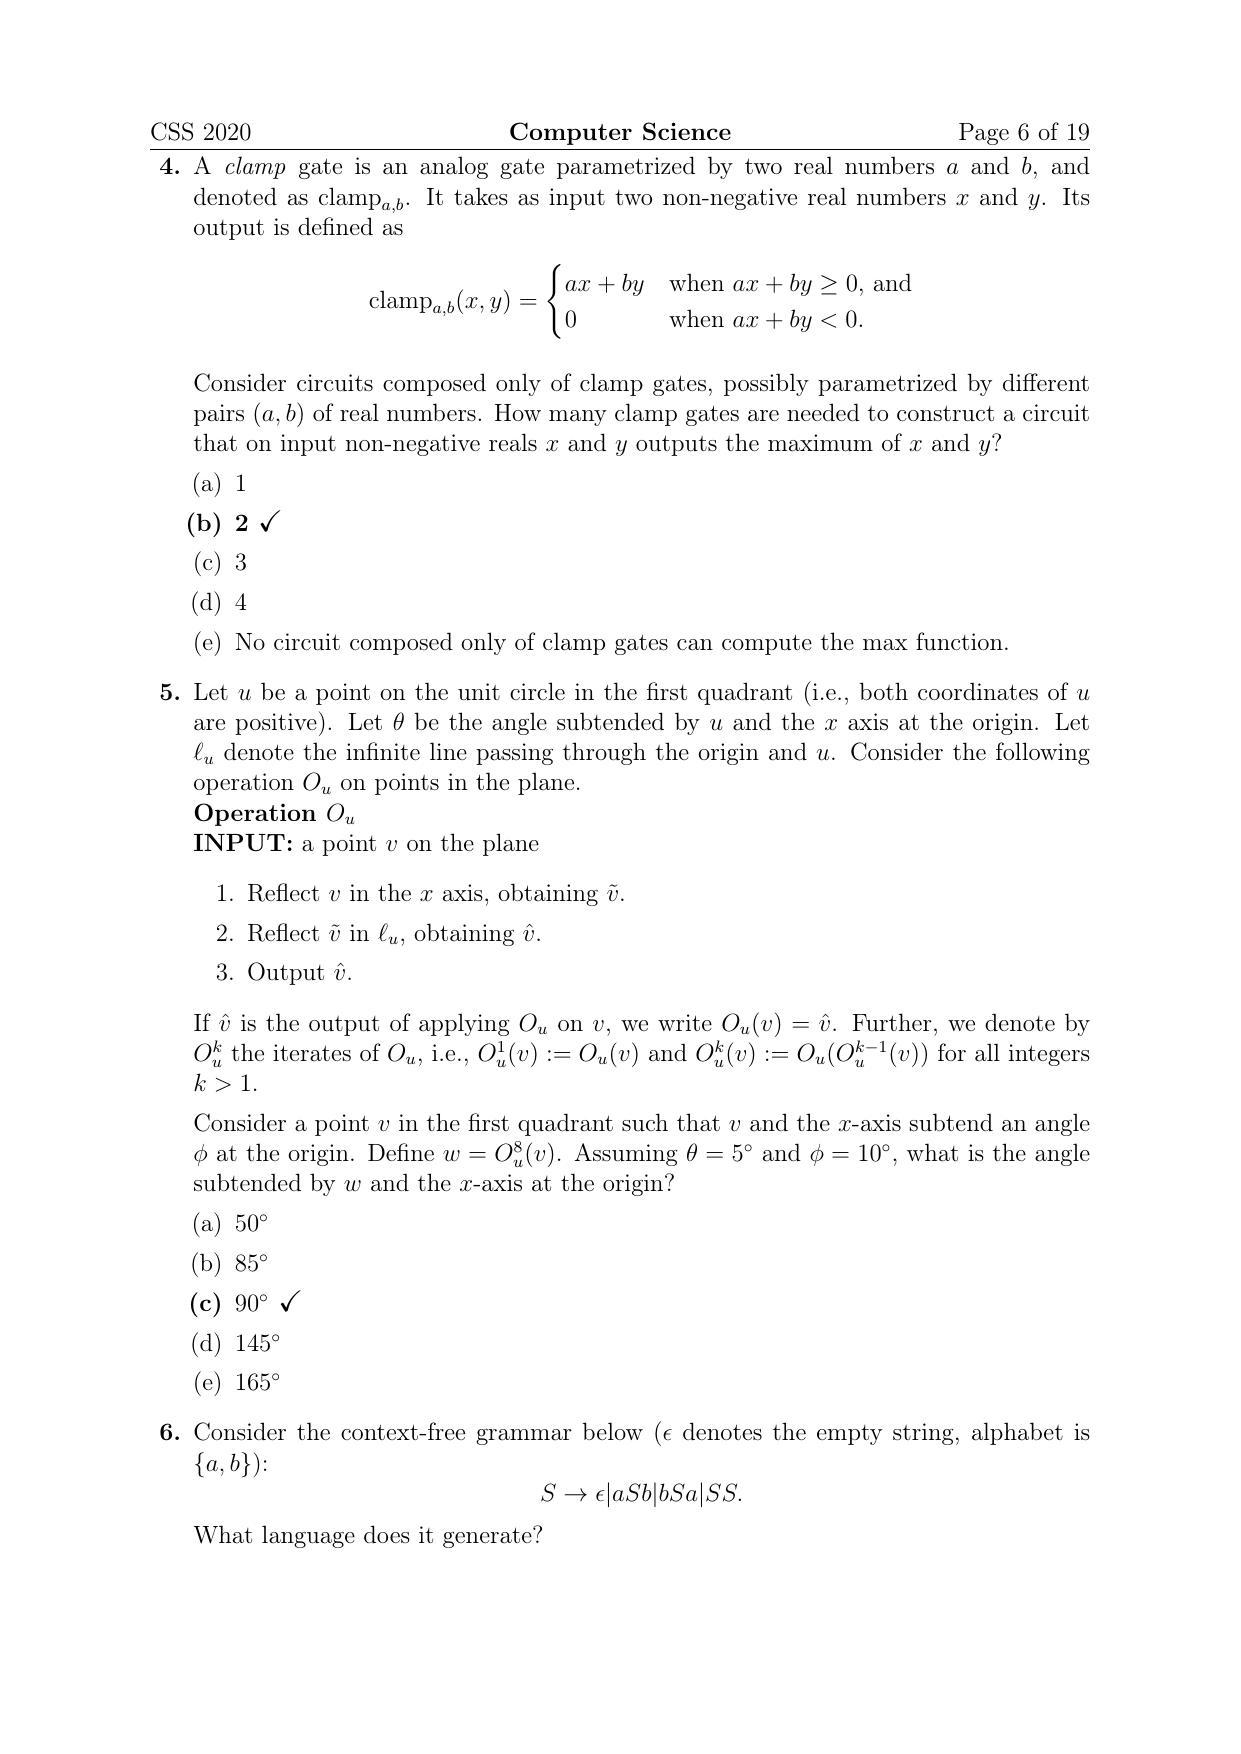 TIFR GS 2020 Computer & Systems Sciences Question Paper - Page 6